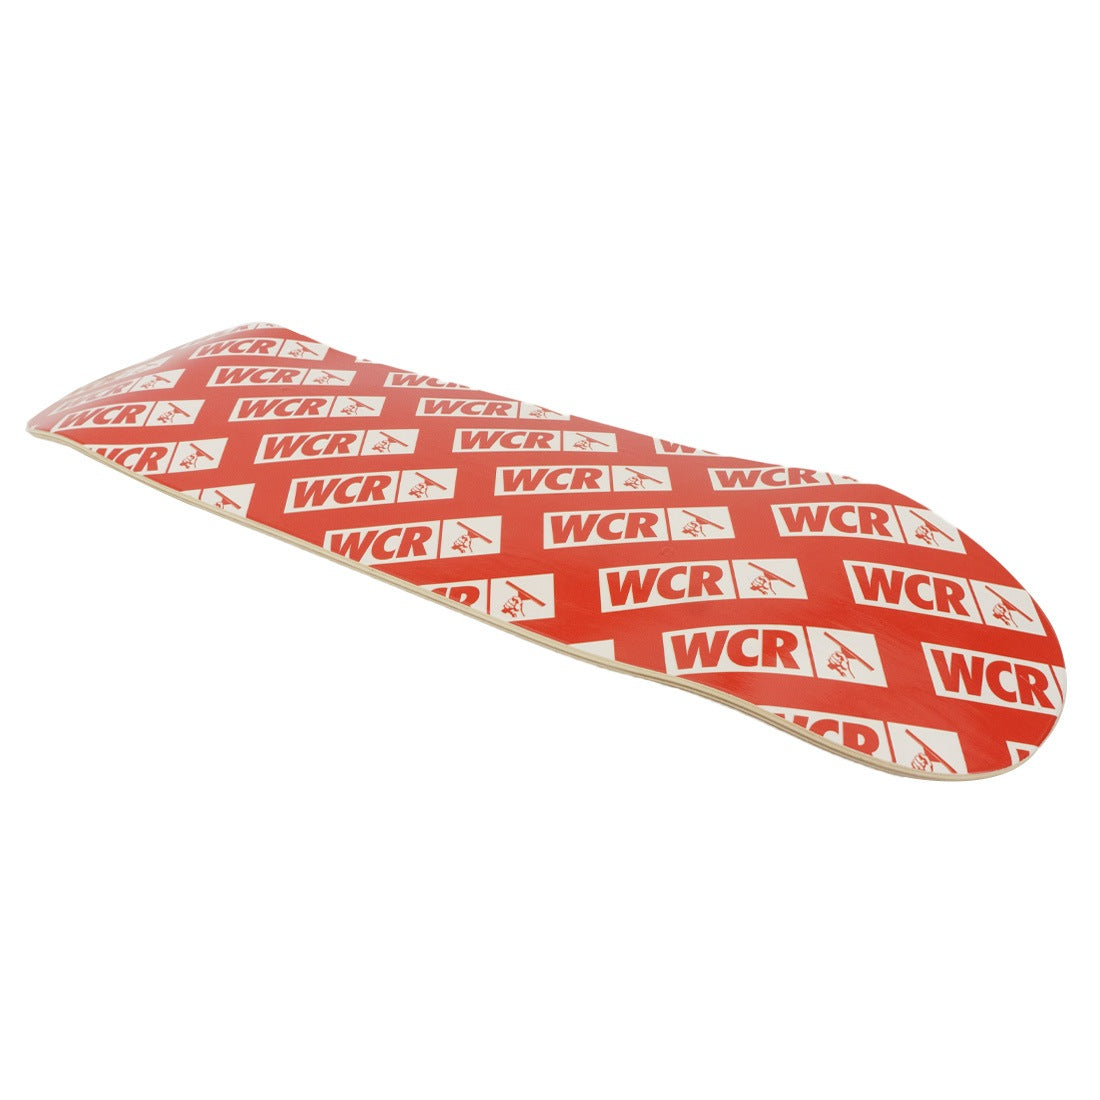 WCR Skateboard Deck - Repeat Logo Left View